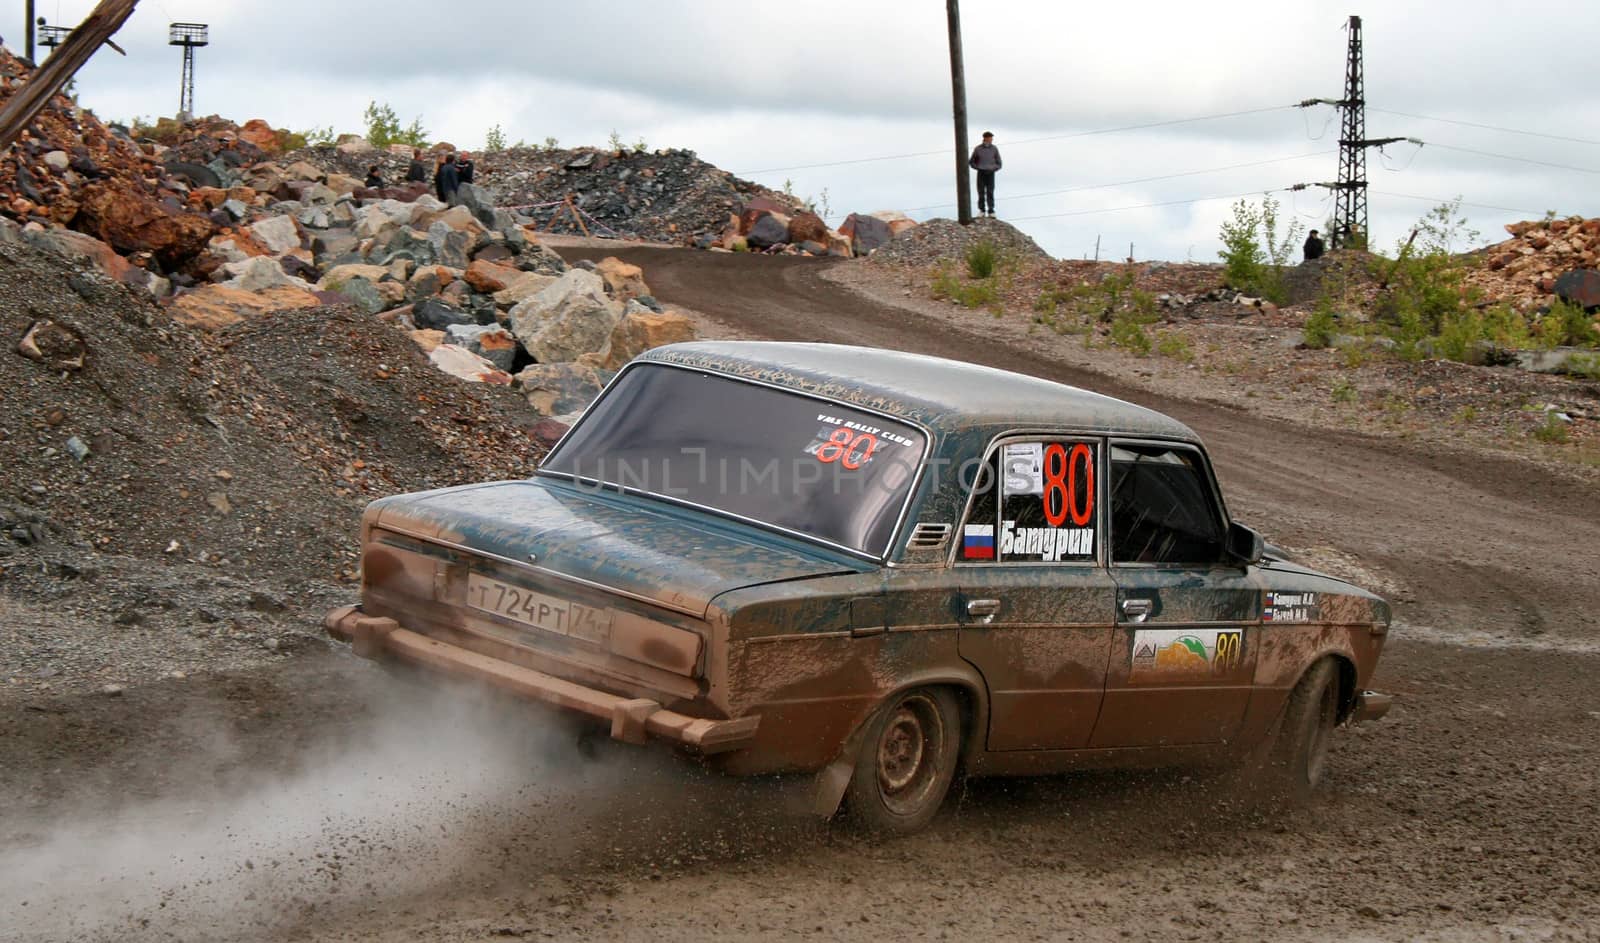 BAKAL, RUSSIA - AUGUST 8: Maxim Bychek's LADA (No. 80) competes at the annual Rally Southern Ural on August 8, 2009 in Bakal, Satka district, Chelyabinsk region, Russia.